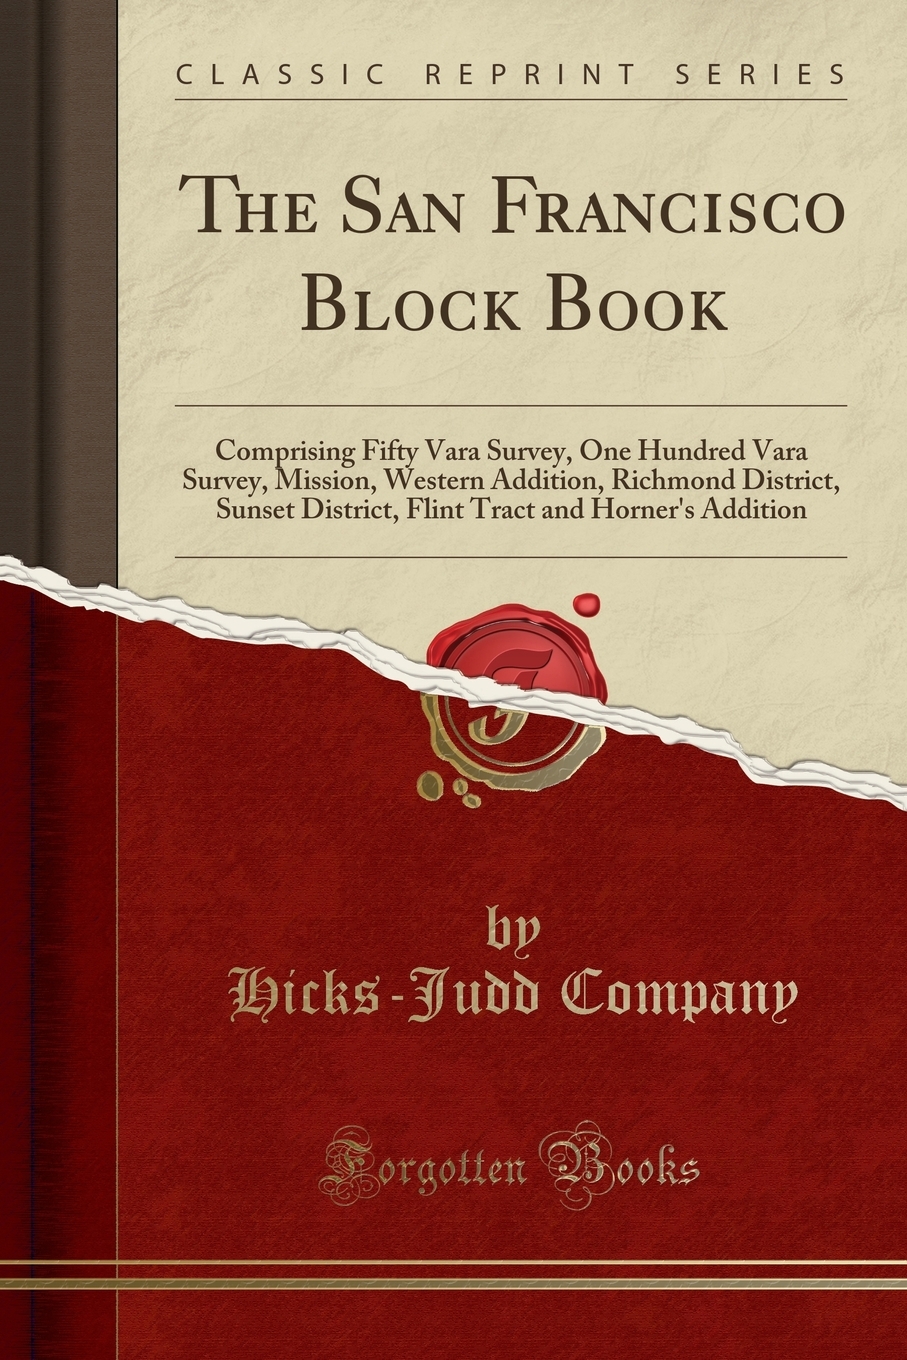 The San Francisco Block Book : Comprising Fifty Vara Survey, One Hundred Vara Survey, Mission, Western Addition, Richmond District, Sunset District, Flint Tract and Horner's Addition (Classic Reprint) - image 1 of 1